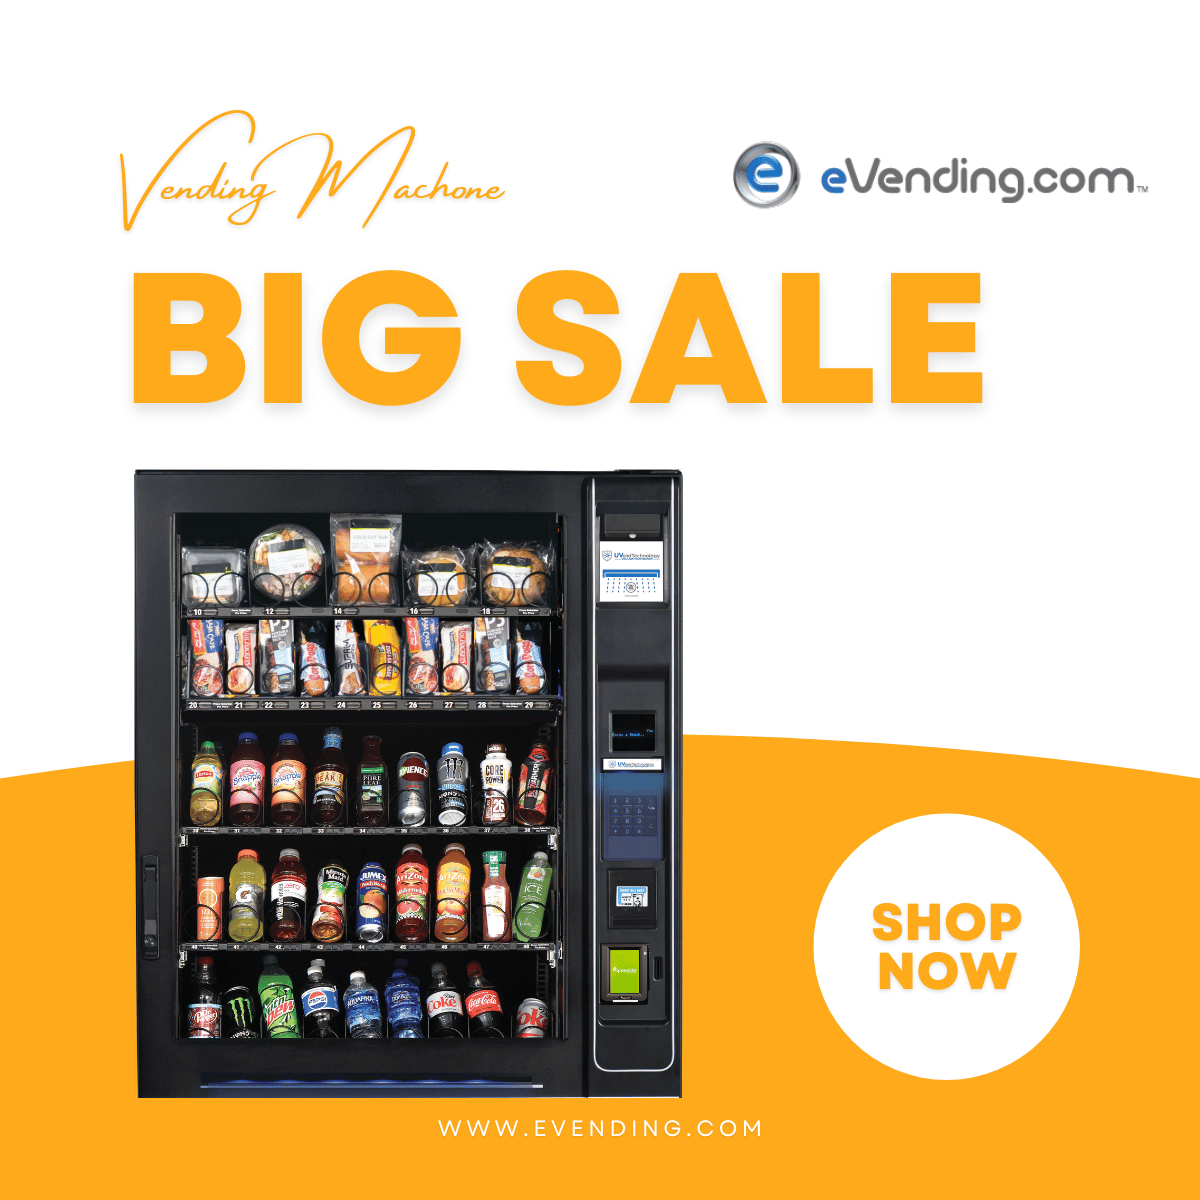 FINDING AFFORDABLE VENDING MACHINE SALES